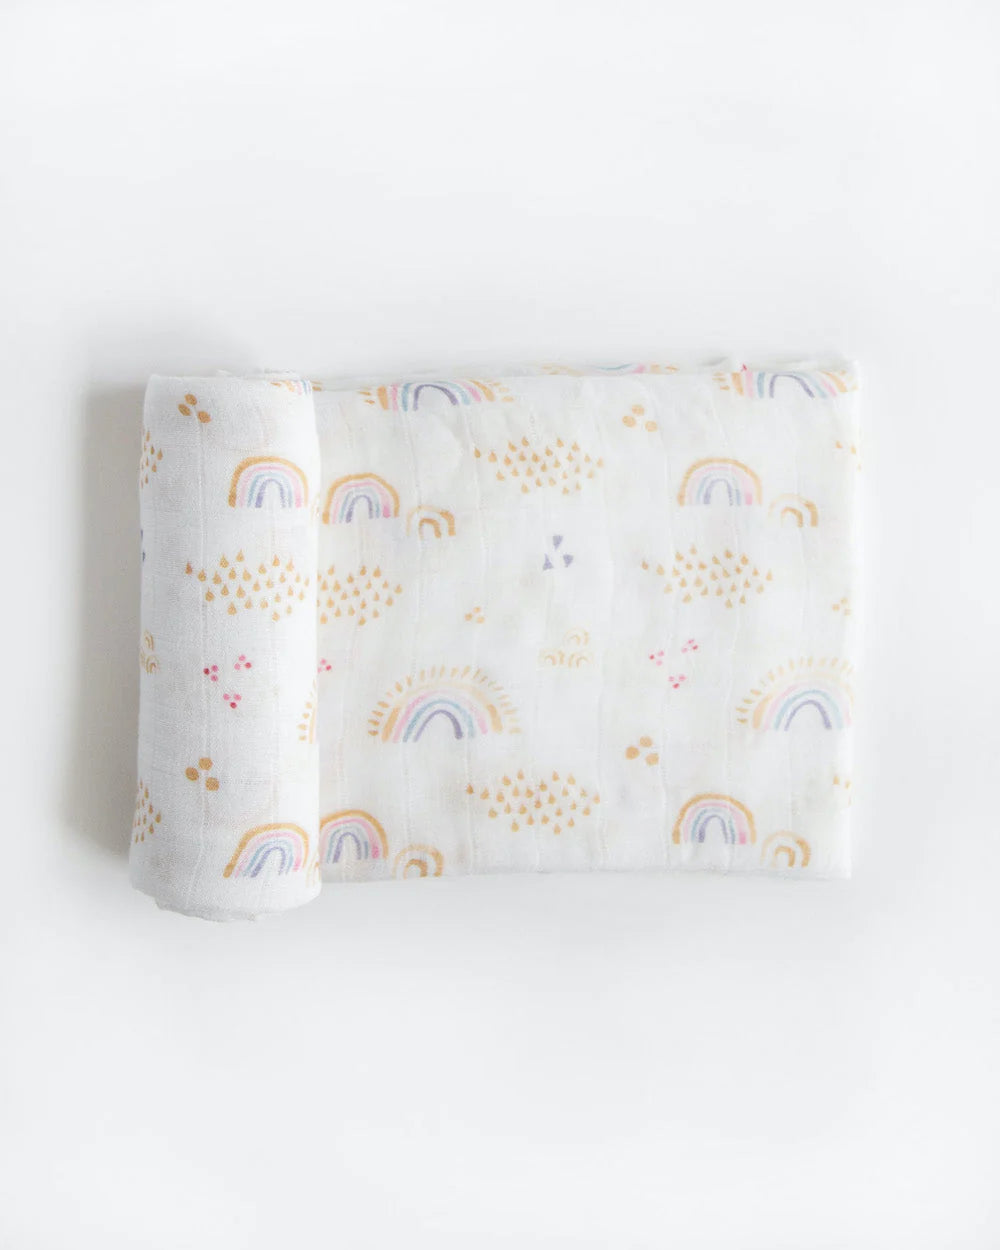 Rainbows and Raindrops Deluxe Muslin Swaddle Single